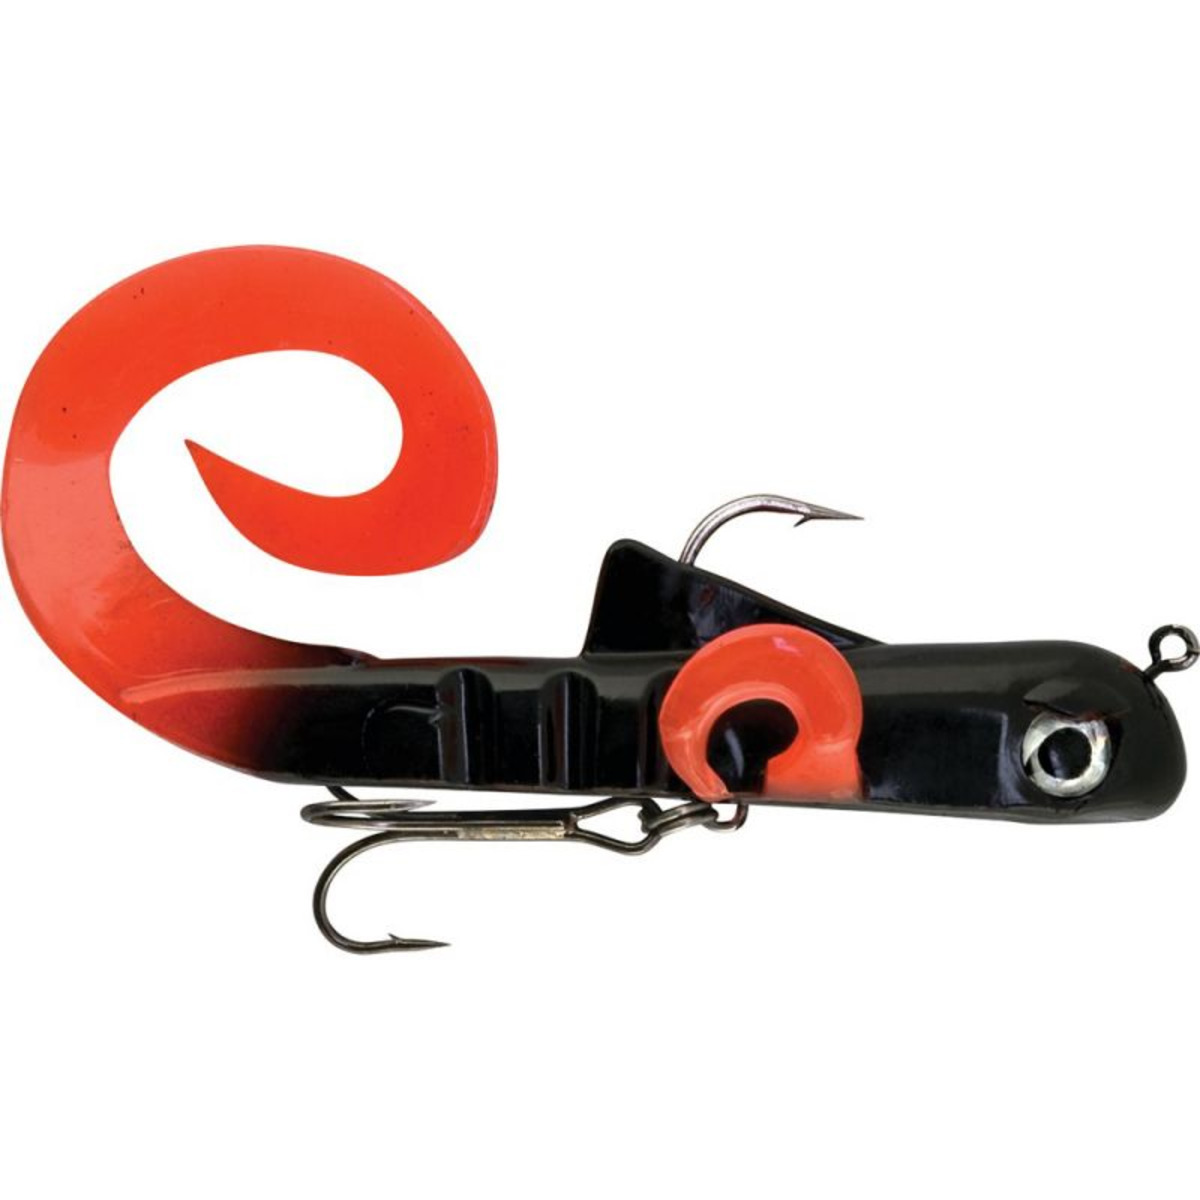 Rapture Creature Shallow Diver - 20.0 g - 15 cm - 2/0-1/0 - Black and Red